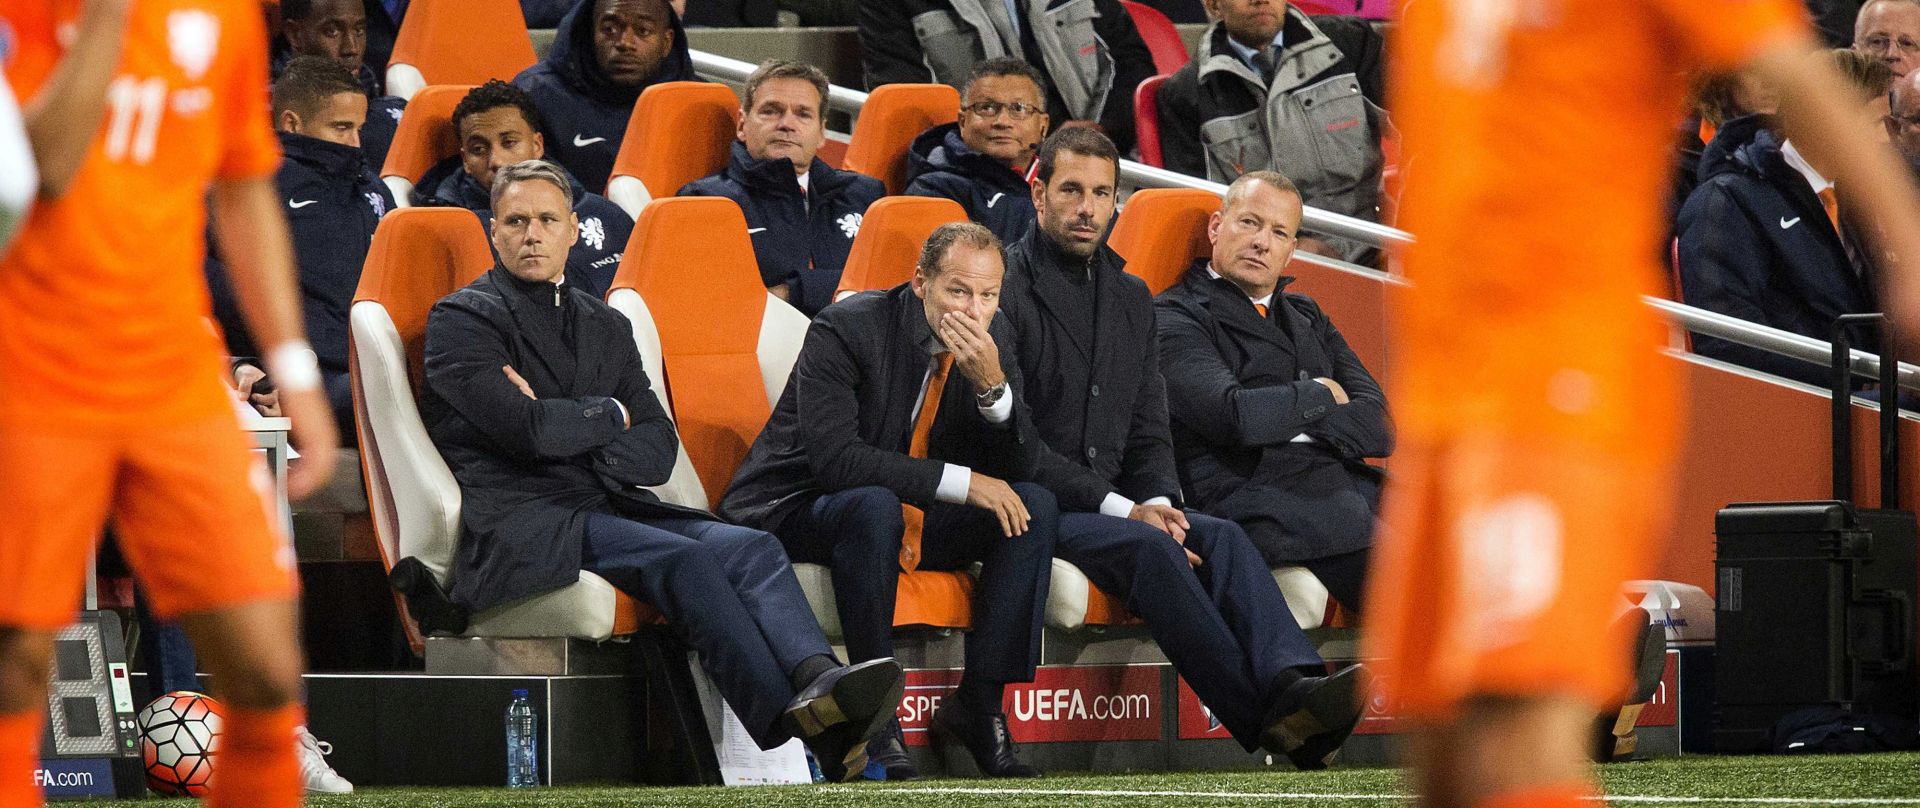 epa04976589 Coach Danny Blind (C) of the Dutch national team sits on the bench with his assistants Marco van Basten (L) and Ruud van Nistelrooij (R) during the UEFA EURO 2016 qualifying soccer match between the Netherlands and the Czech Republic at Amsterdam ArenA, in Amsterdam, the Netherlands, 13 October 2015.  EPA/KOEN VAN WEEL